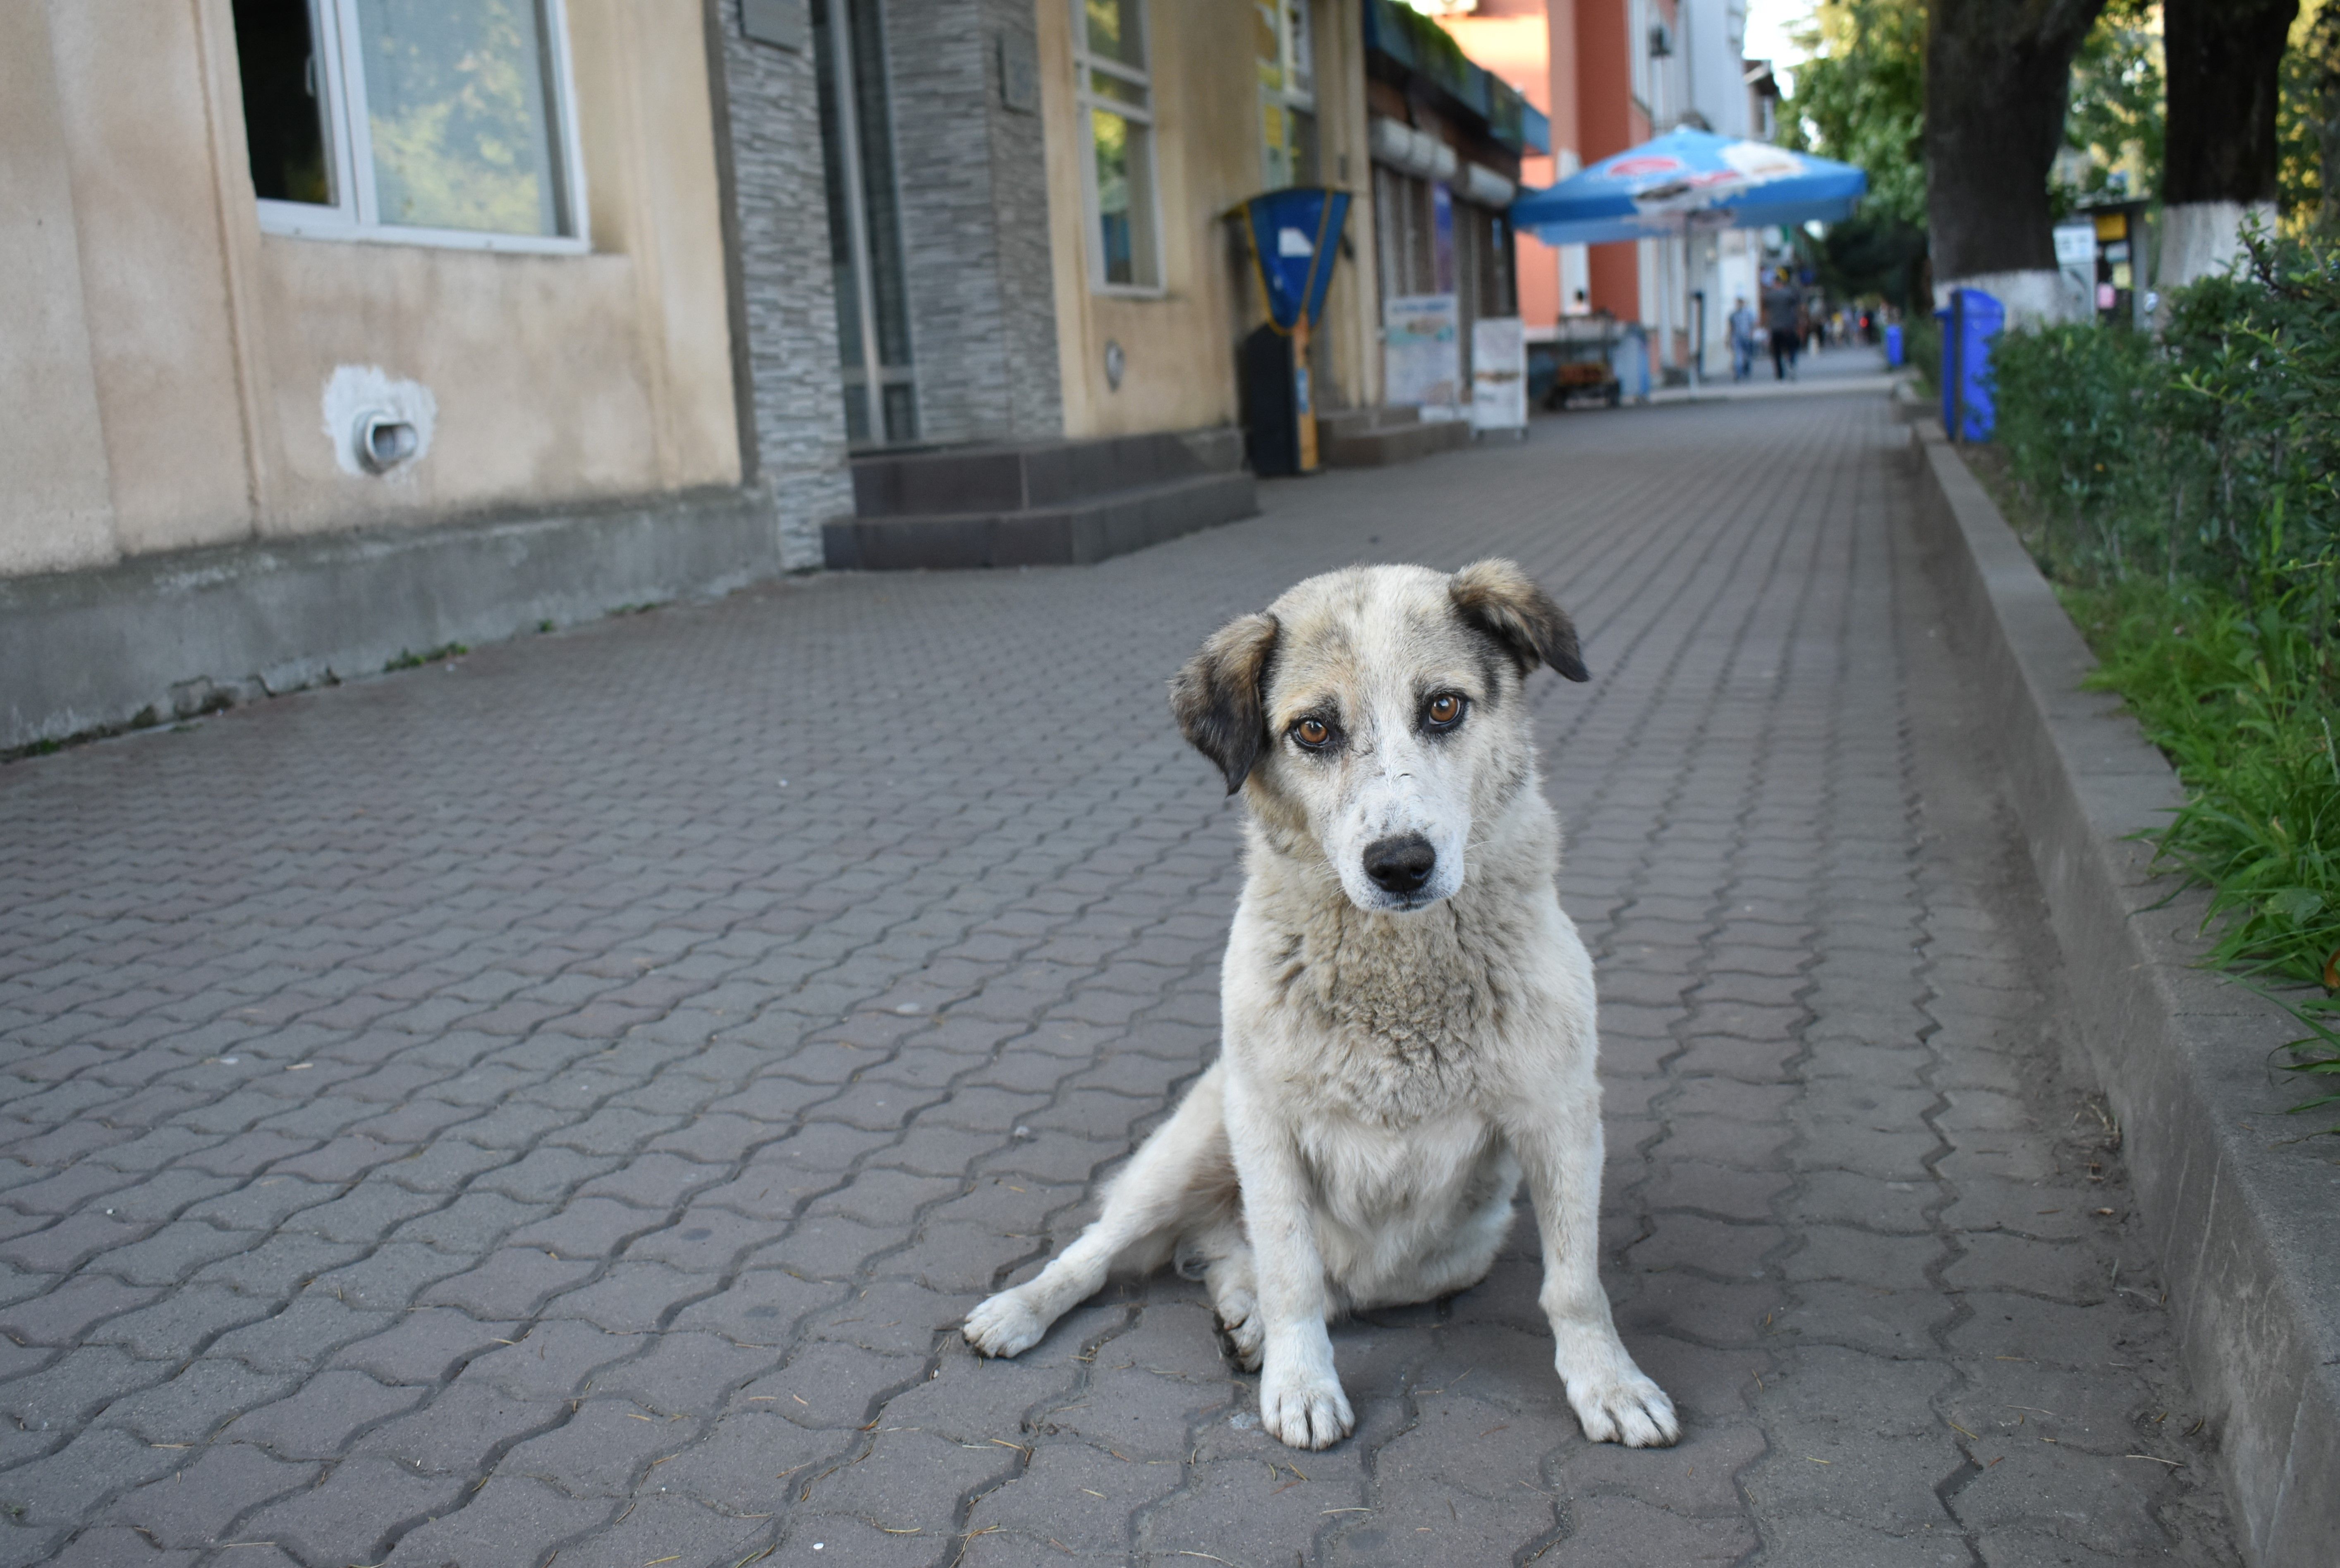 A stray dog who approached the reporter in Zugdidi. Image by Kaitlyn Johnson. Georgia, 2019.